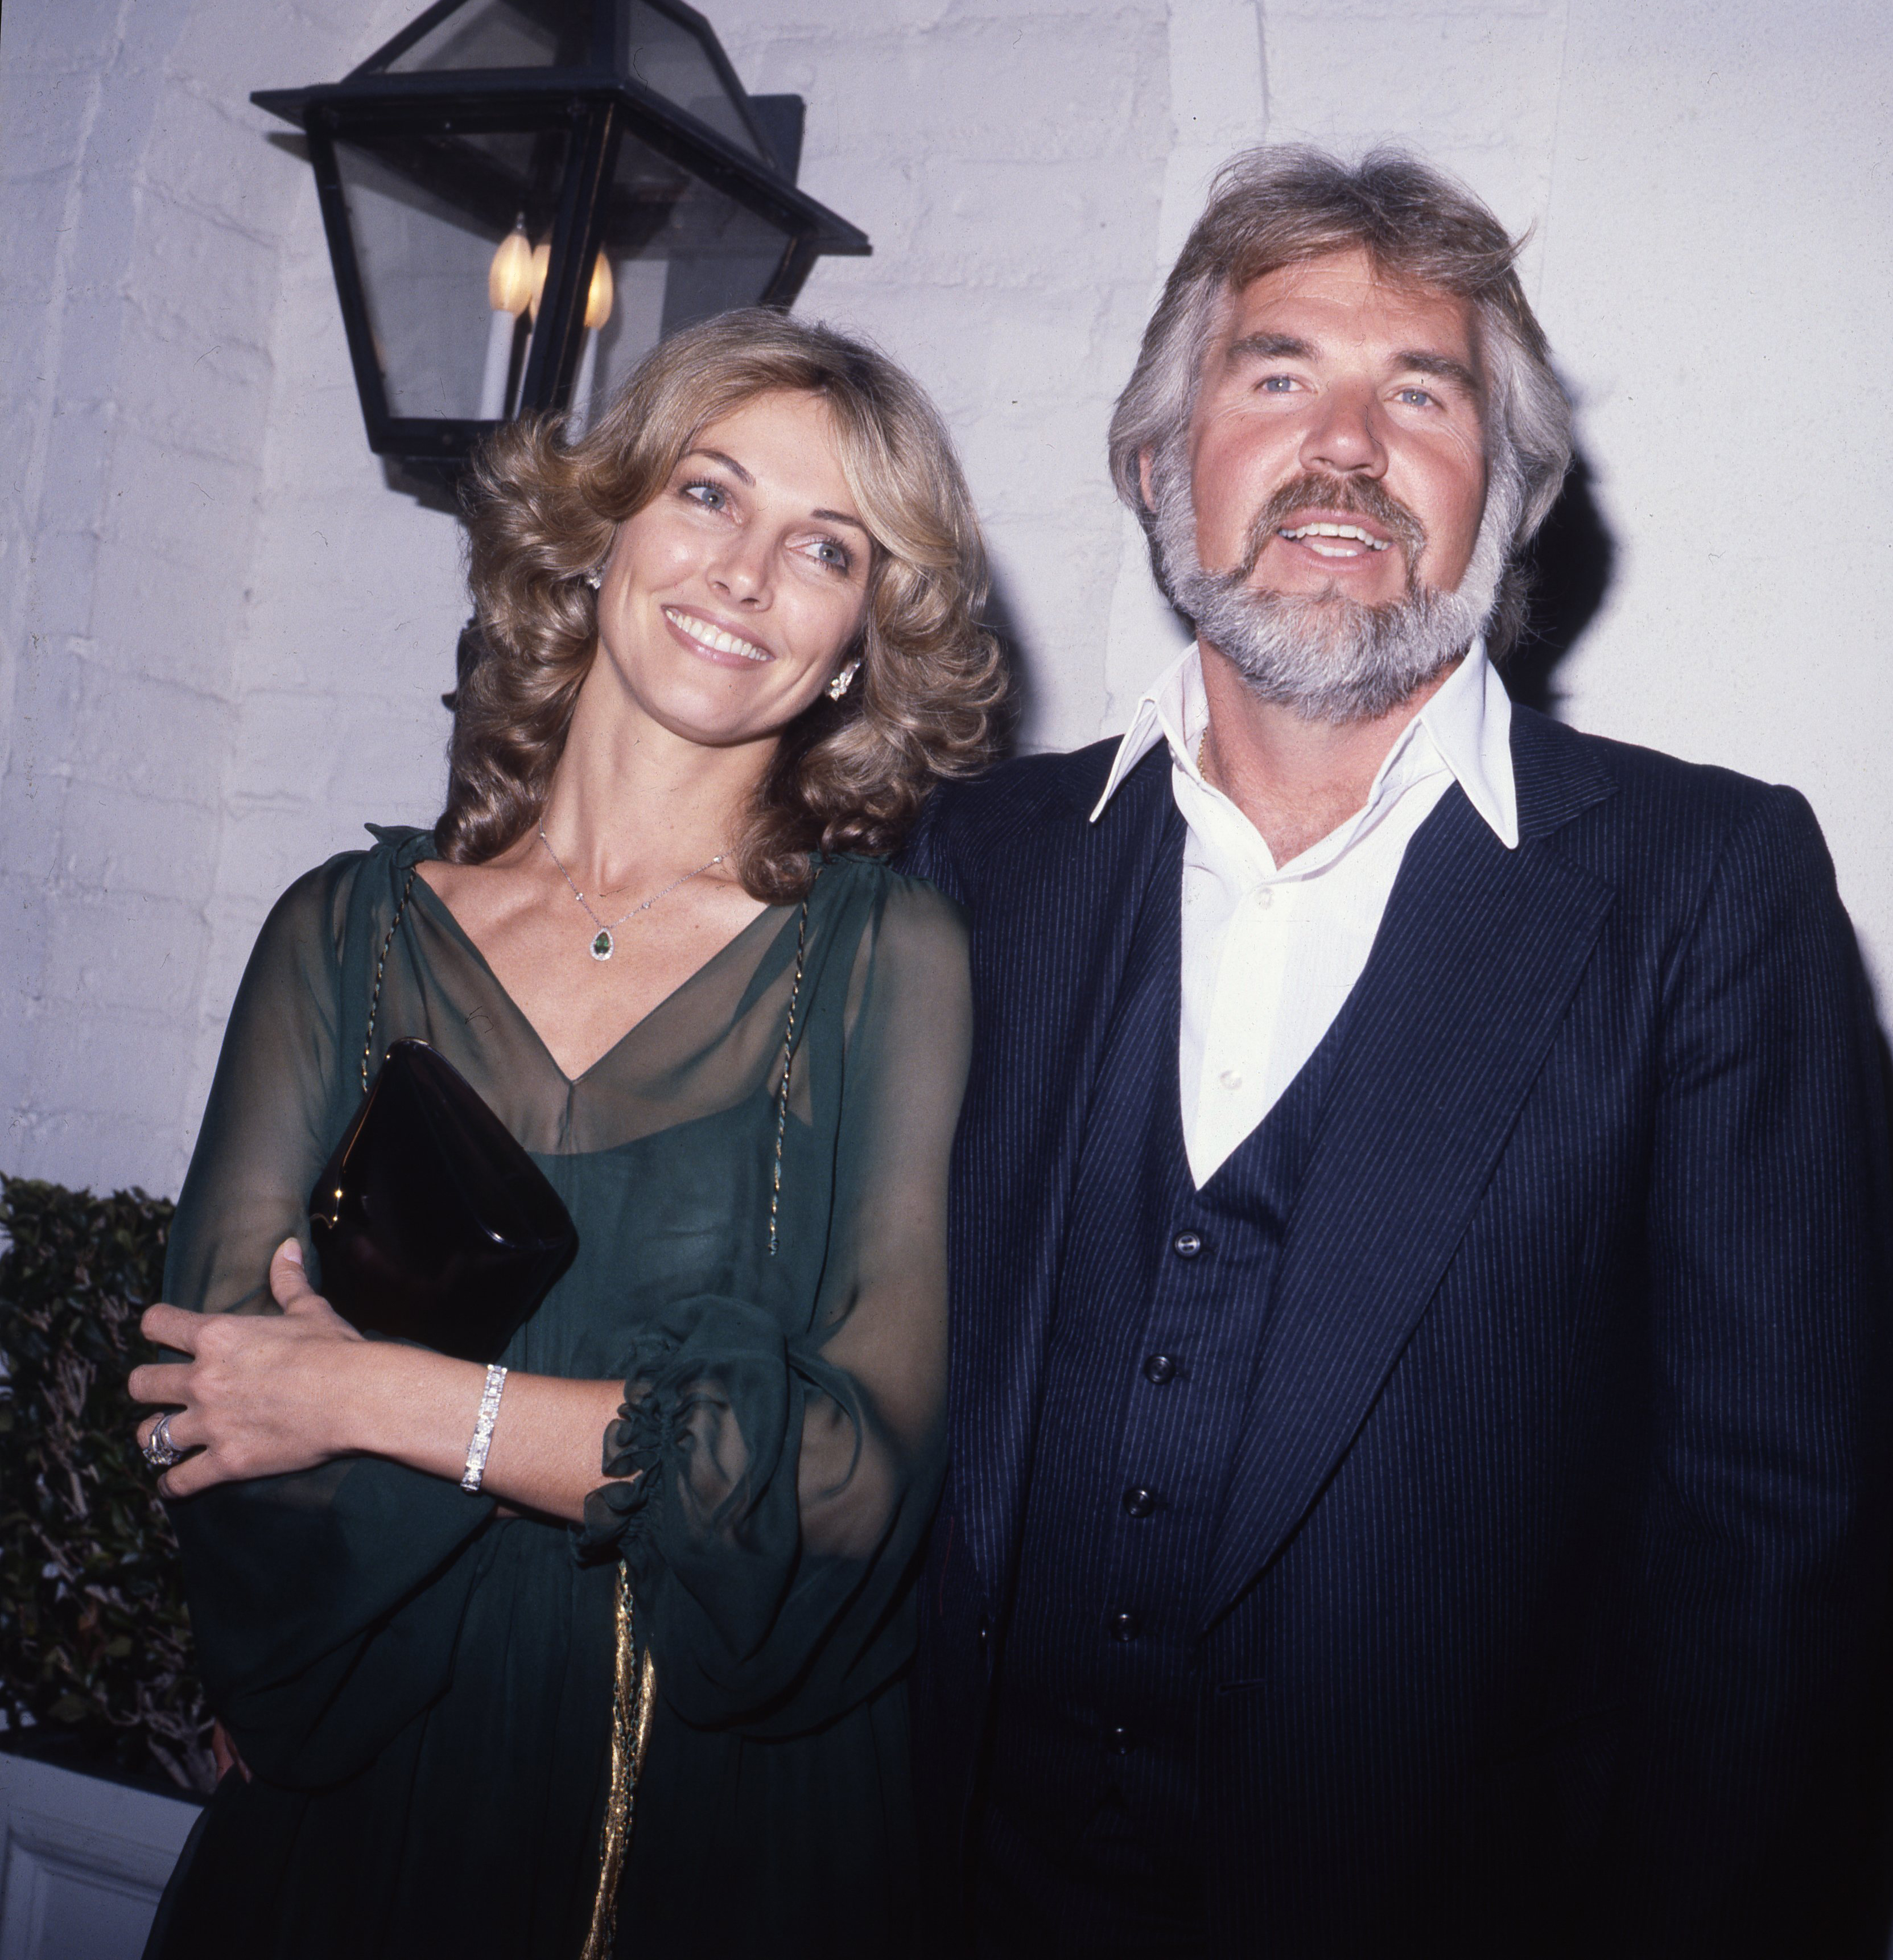 Kenny Rogers and Marianne Gordon at an event in 1980 | Source: Getty Images